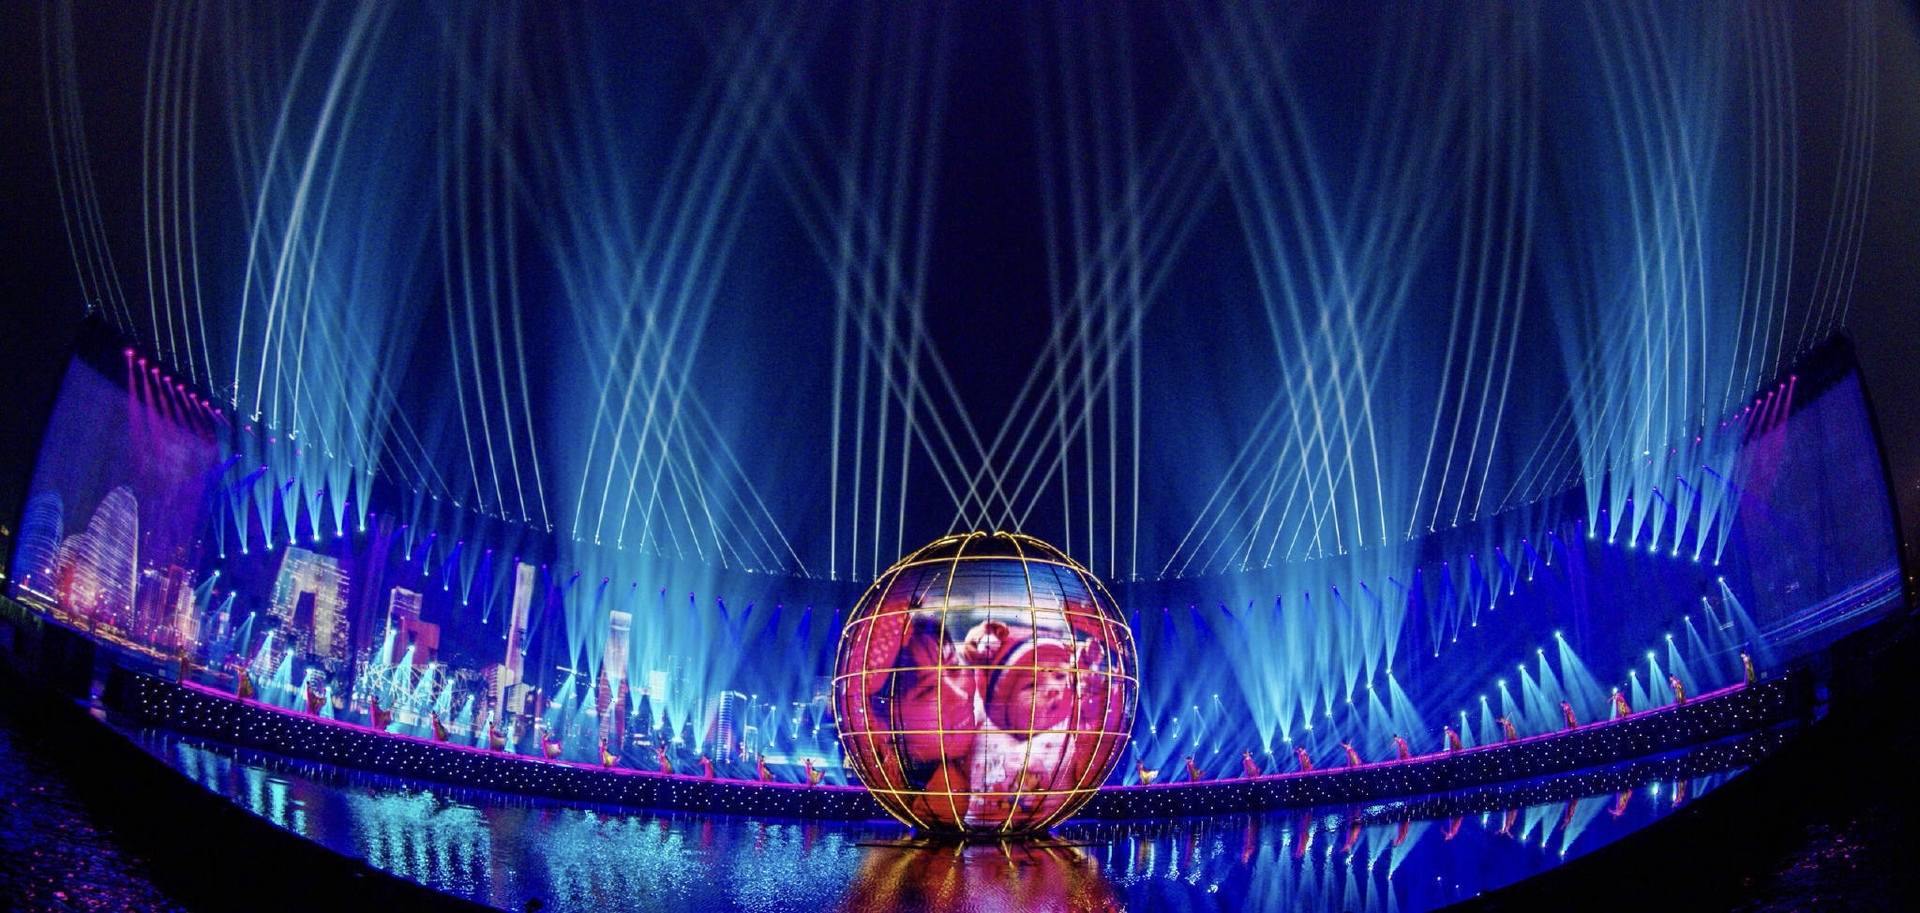 Using LED display screen of the spherical effect on the stage